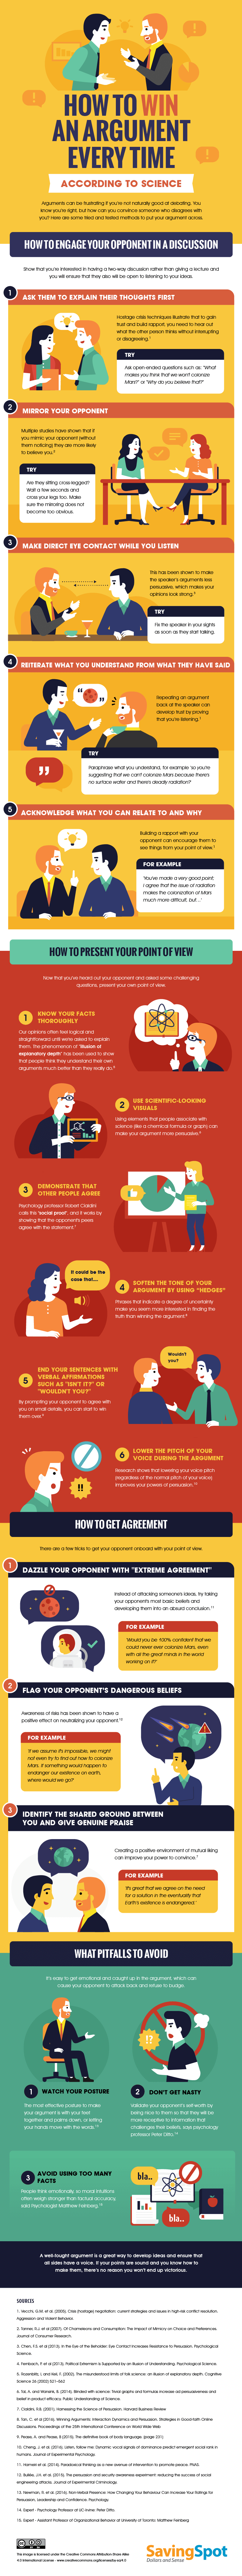 How to Win an Argument Every Time (According to Science) Infographic